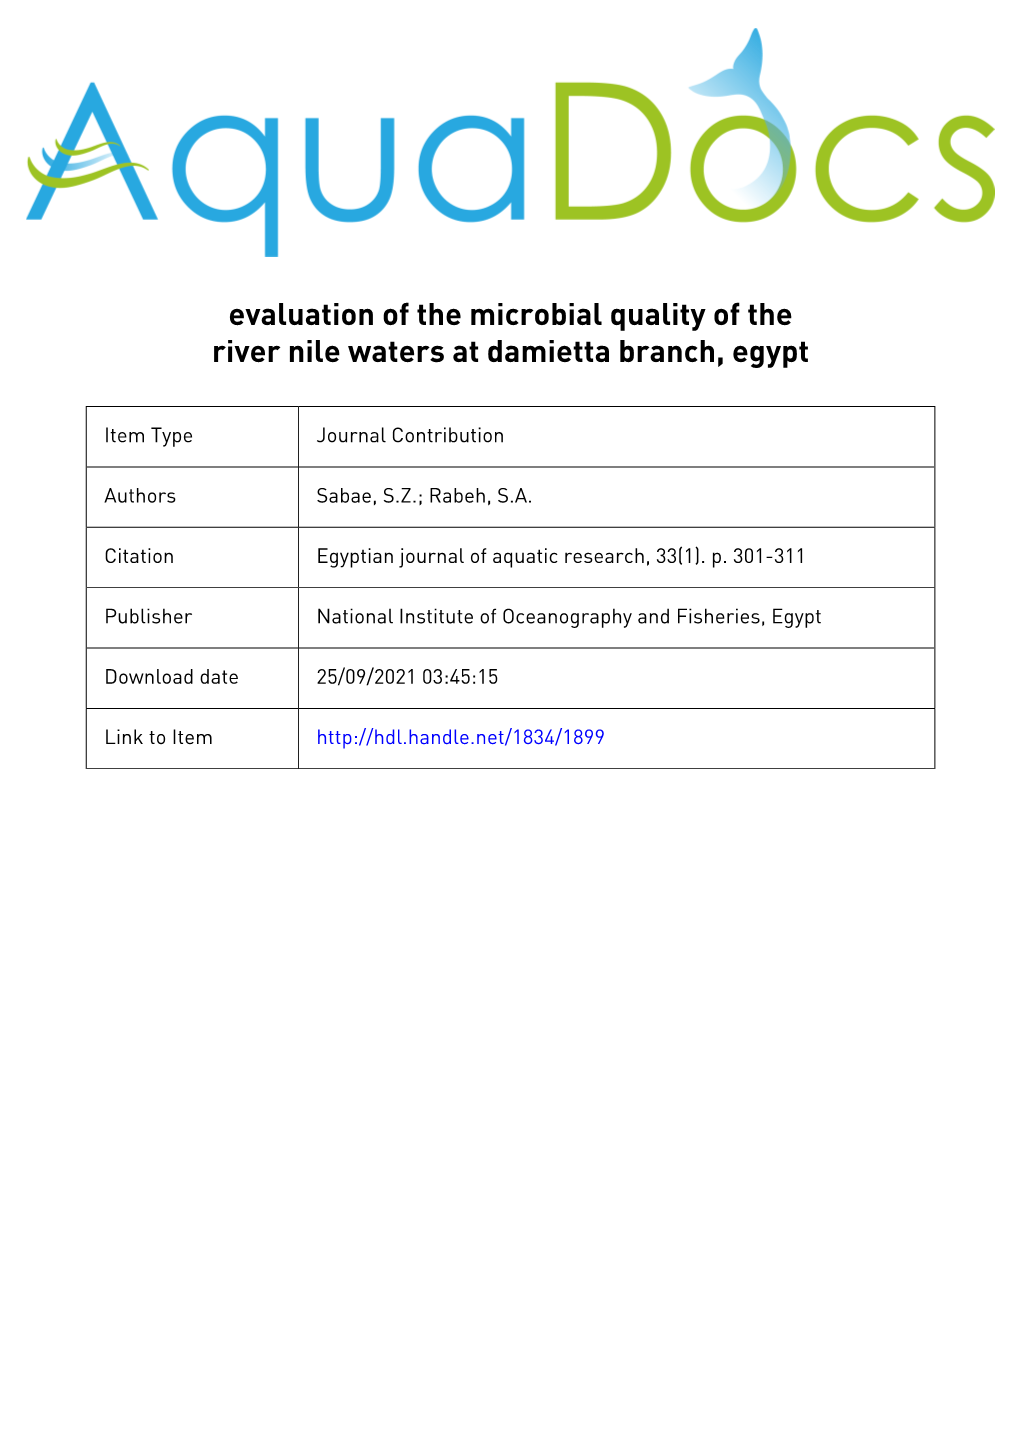 Evaluation of the Microbial Quality of the River Nile Waters at Damietta Branch, Egypt